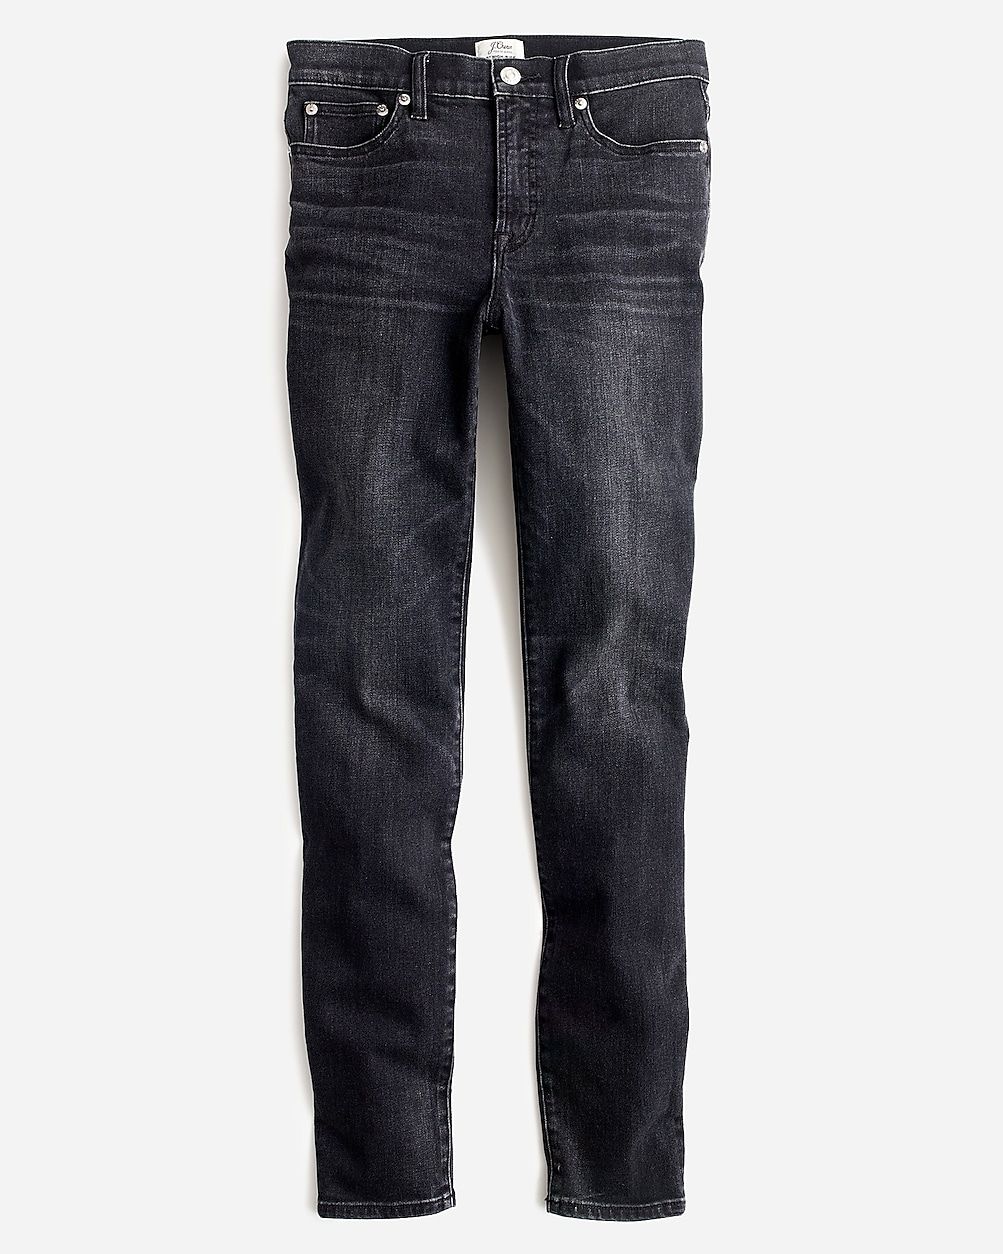 9" high-rise toothpick jean in Charcoal wash | J.Crew US